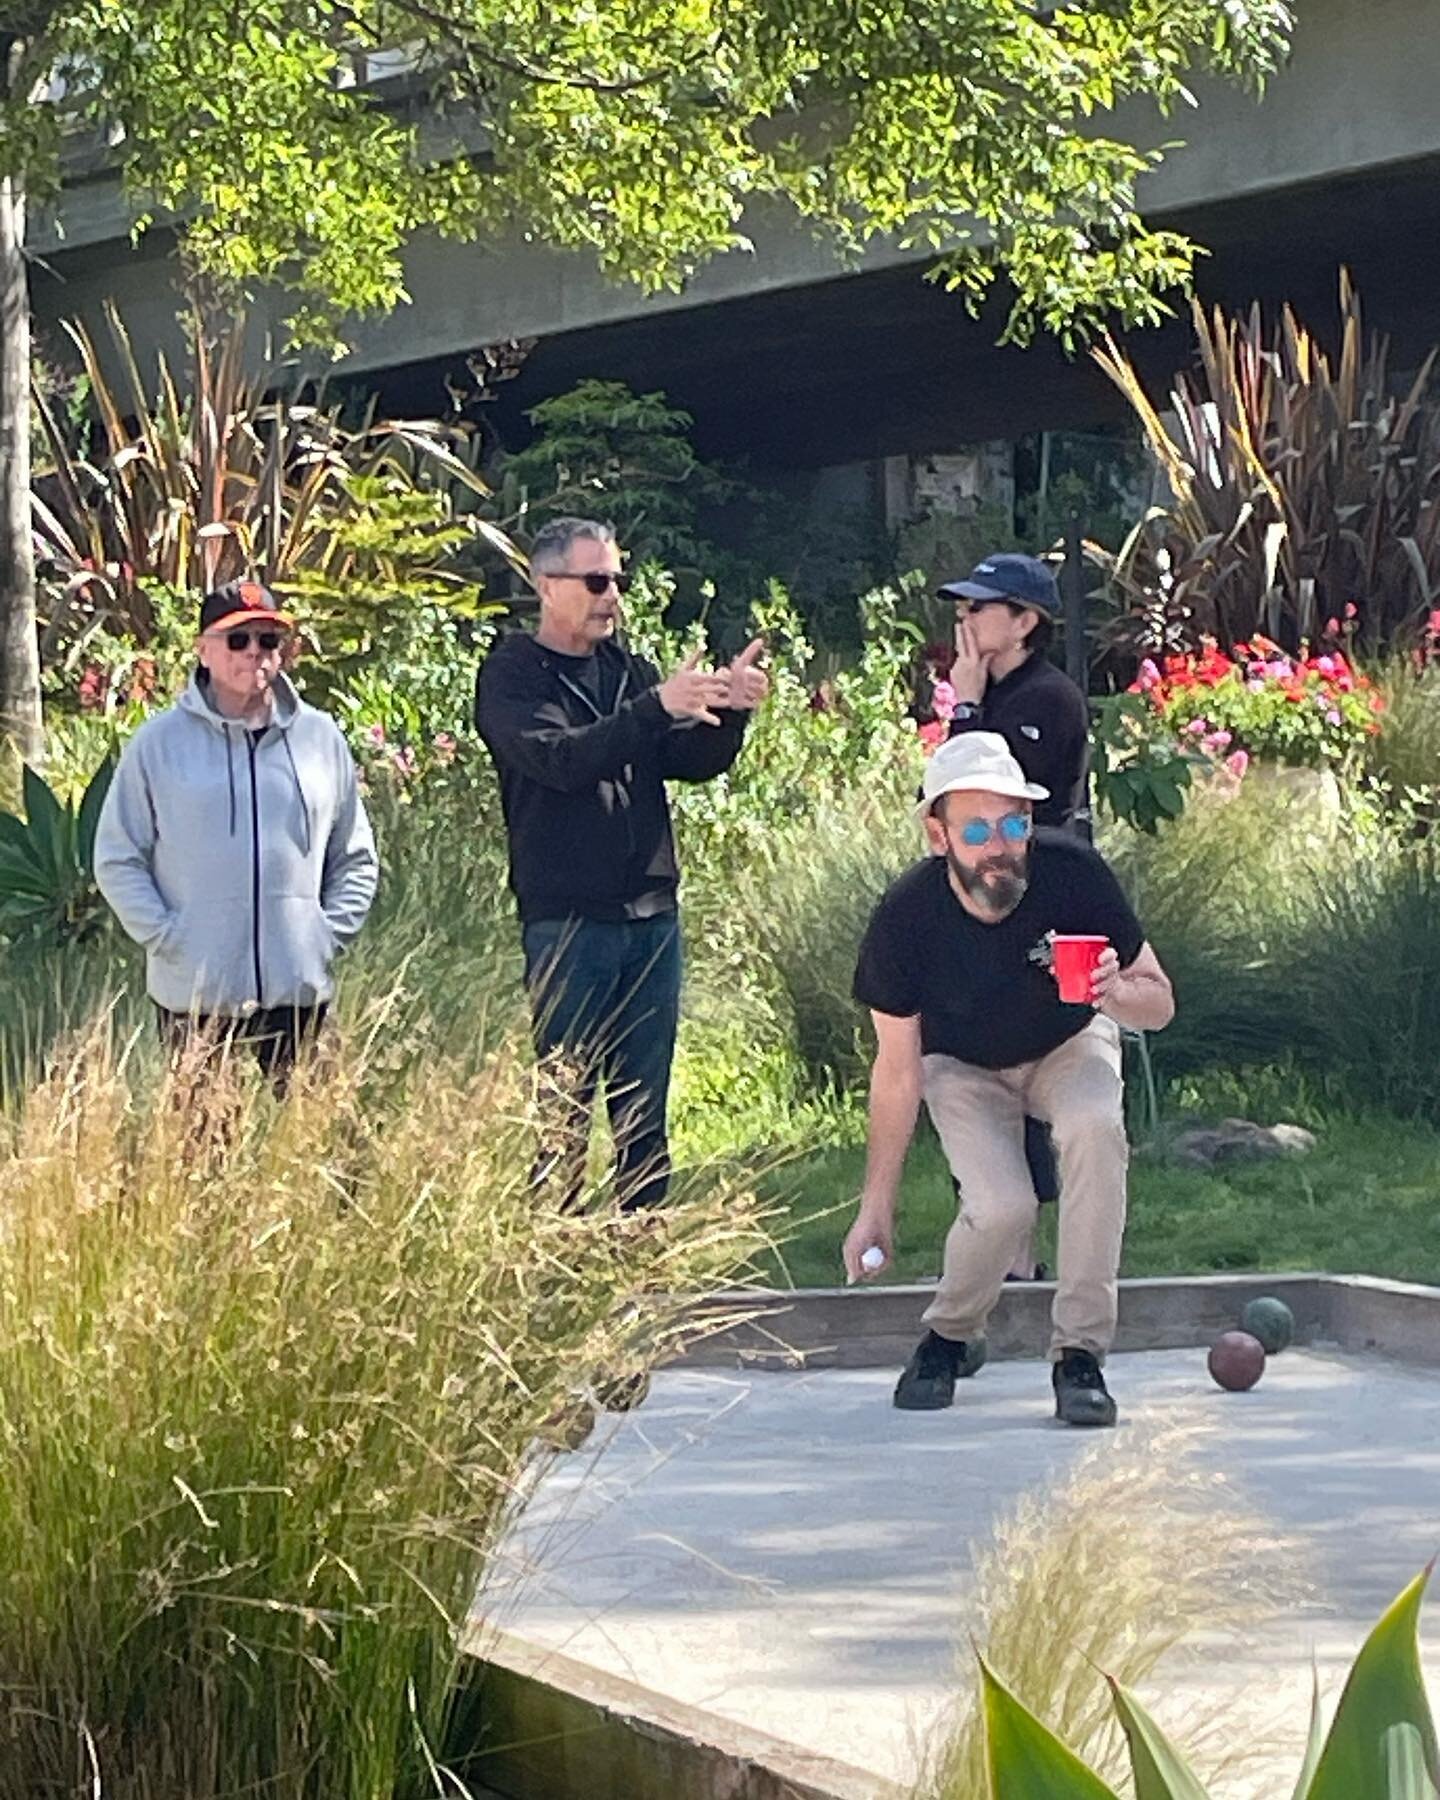 What&rsquo;s a beautiful Sunday afternoon without a little bocce? The celebrated athletes of two hometown Play Bocce in Dogpatch teams went head-to-head, with the Dogpatch Saloon team narrowly edging out the Dogpatch Howlers. Did the Saloon&rsquo;s t